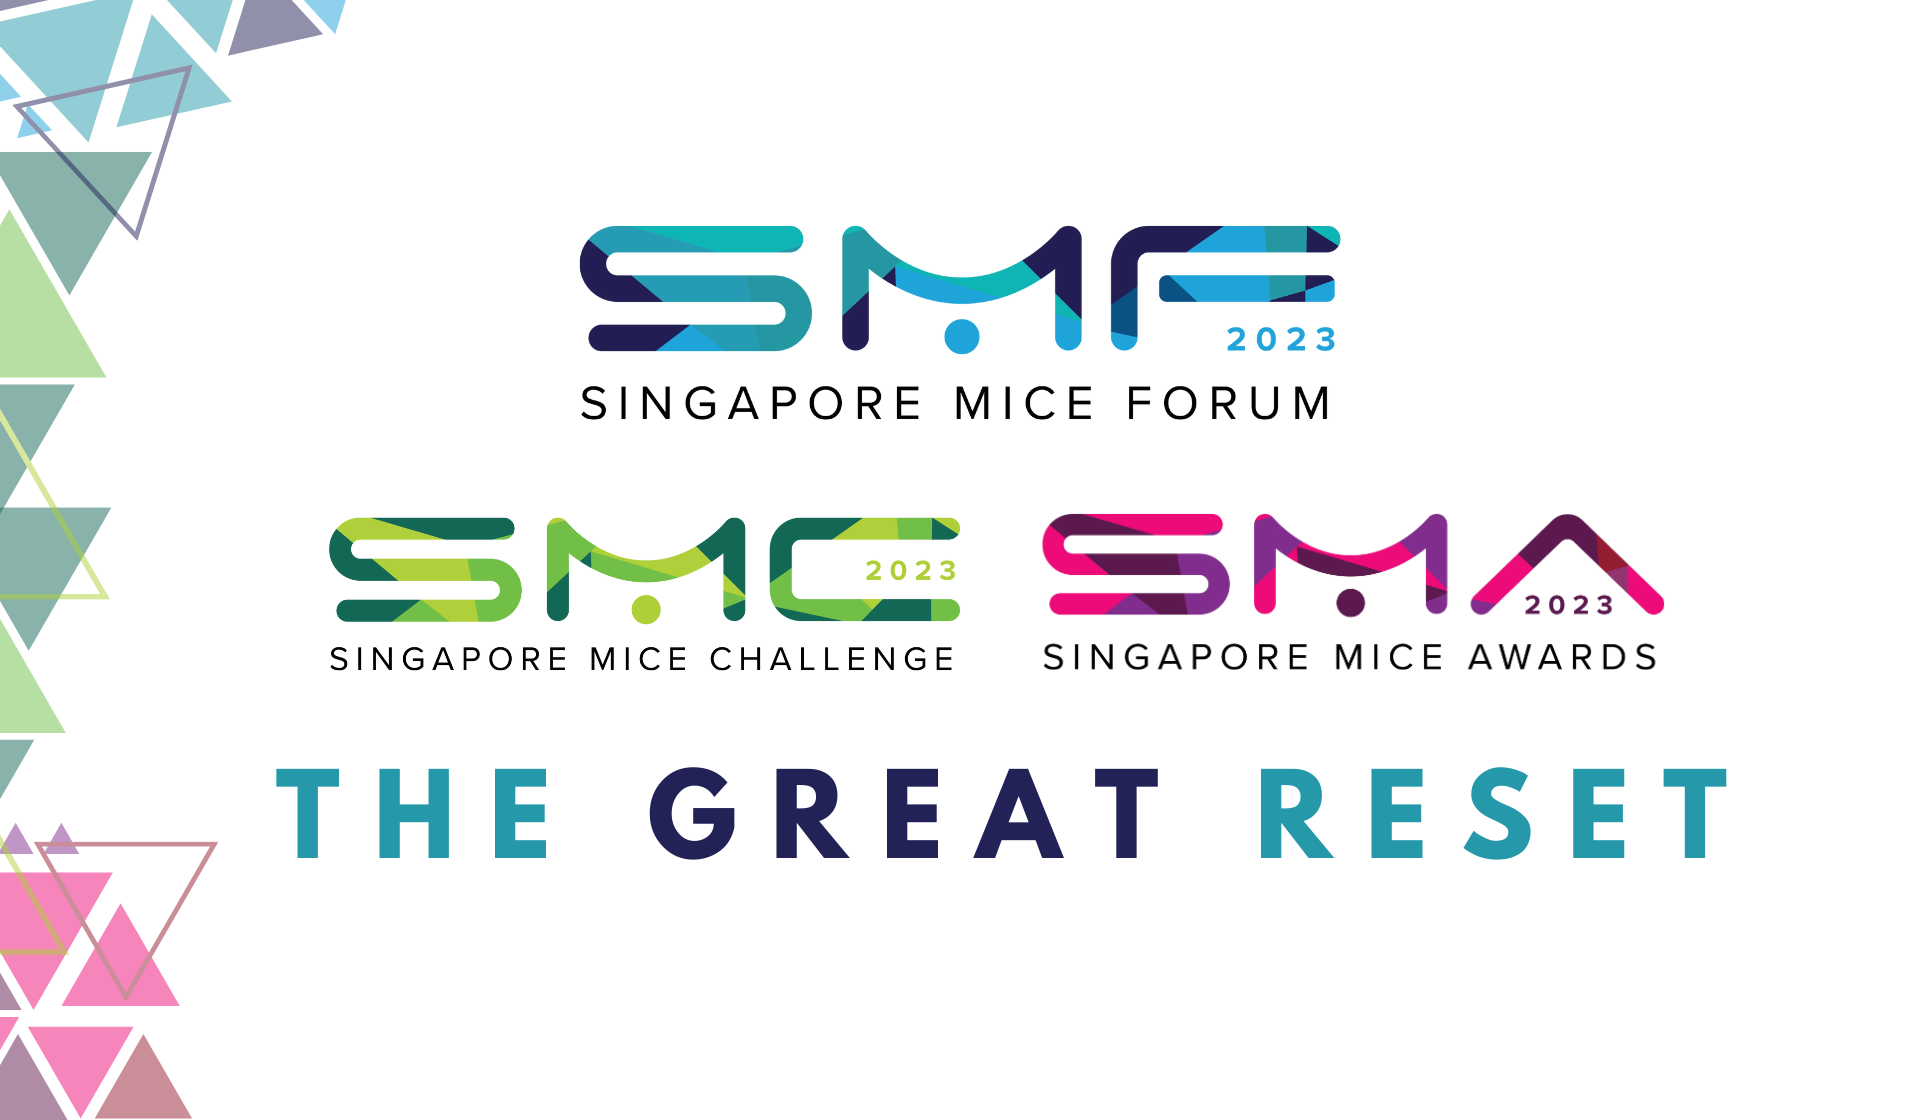 Singapore MICE Forum to set stage for The Great Reset of the MICE industry